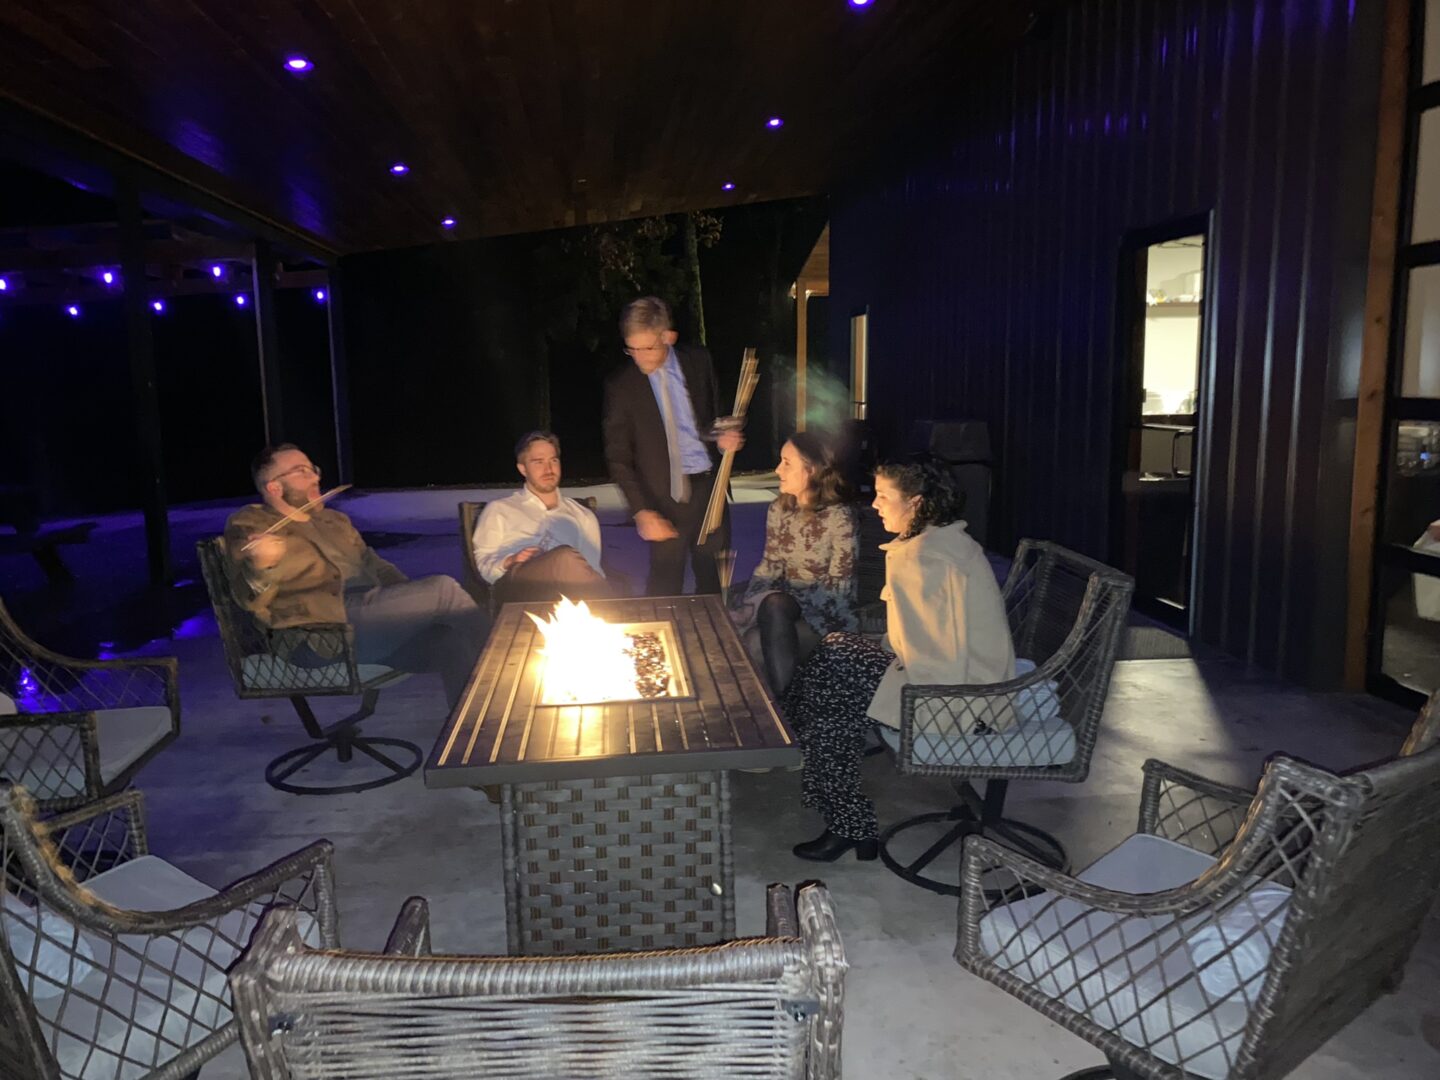 A group of people sitting around an outdoor fire pit.